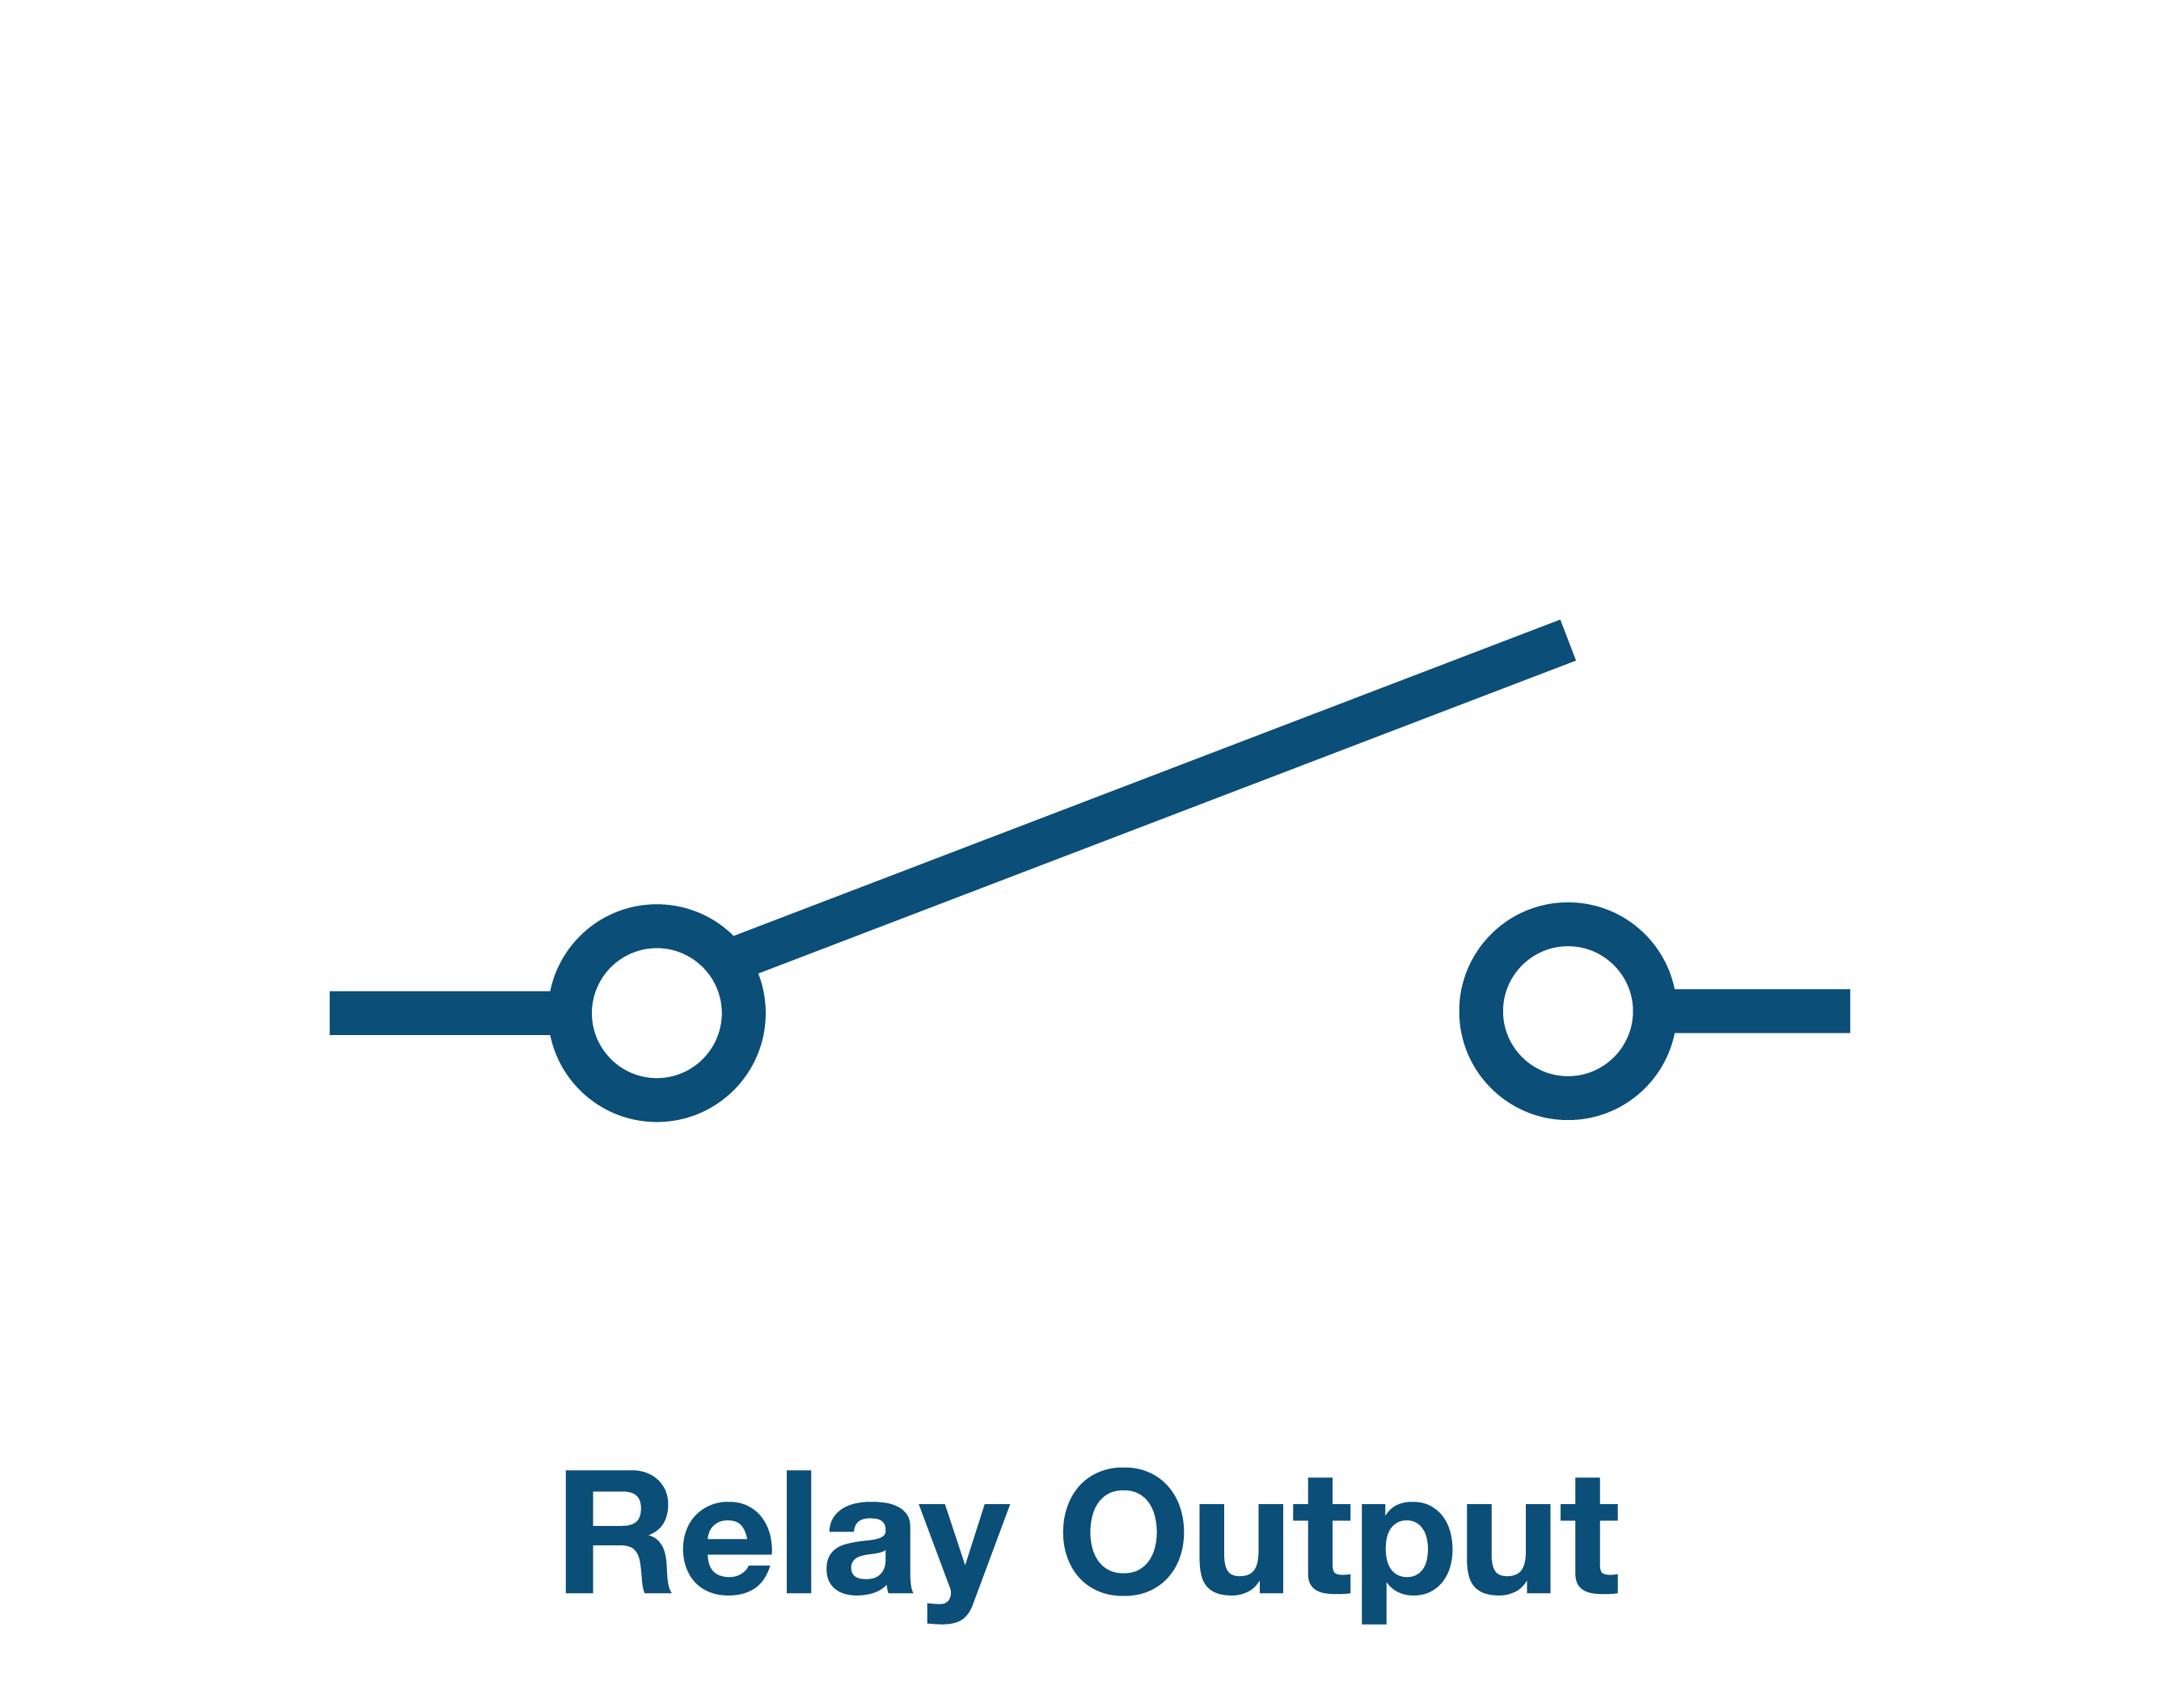 Relay Outputs x 3